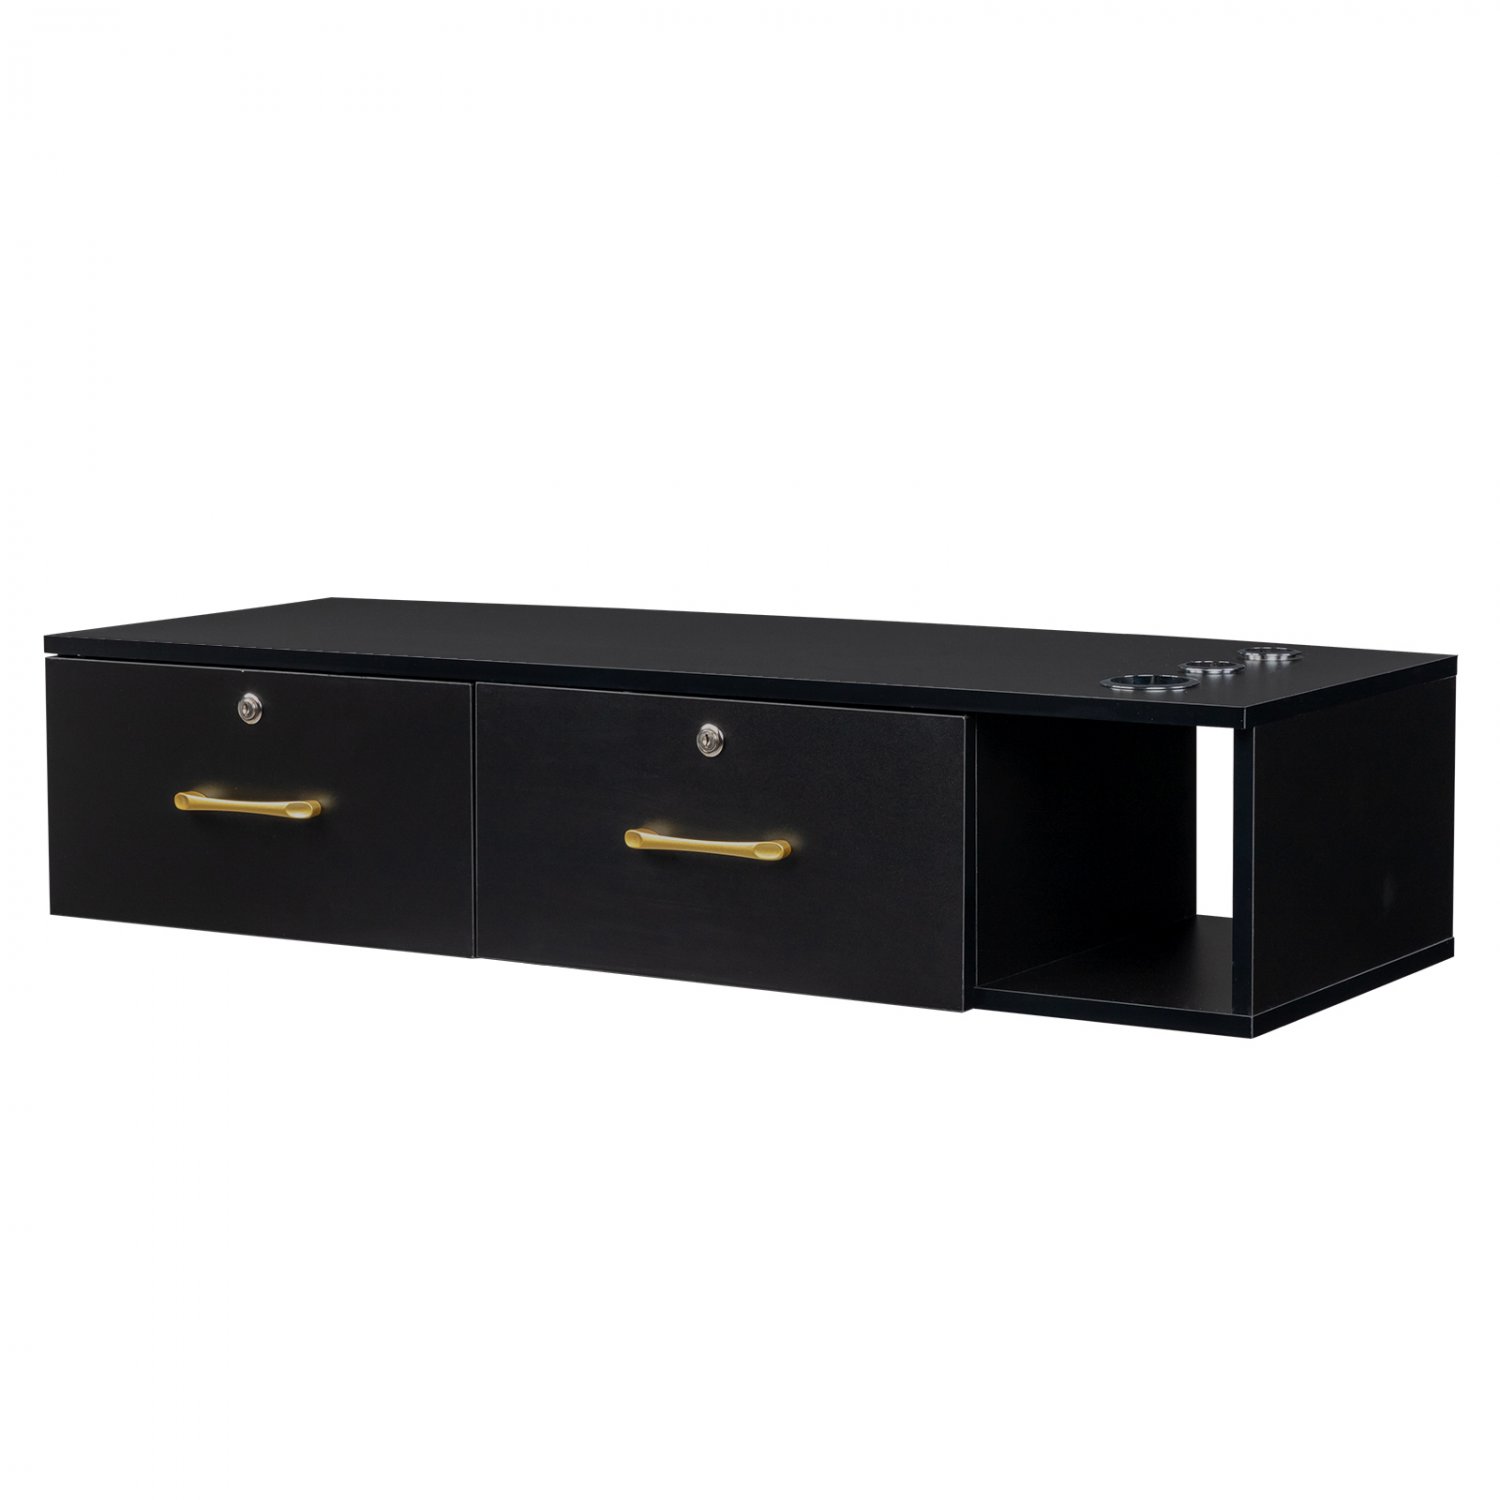 Wall Mount Classic Salon Equipment Locking Cabinet with 2 Drawers & 3 Holes Black